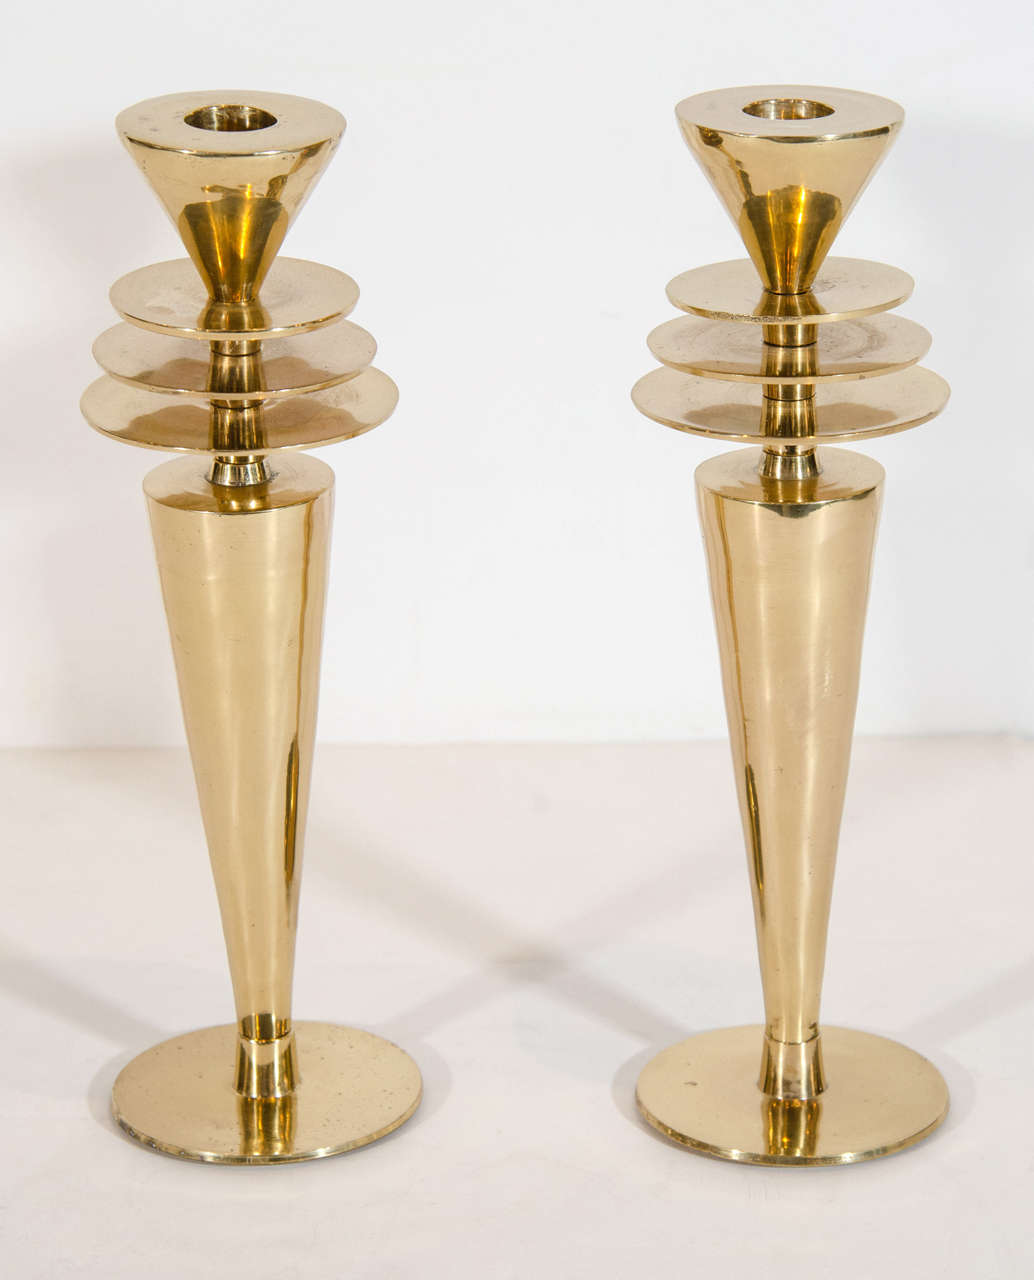 Pair of highly stylized Art Deco candlesticks with tapered stem design and Machine Age / Skyscraper inspired stepped tiered details, and circular base.